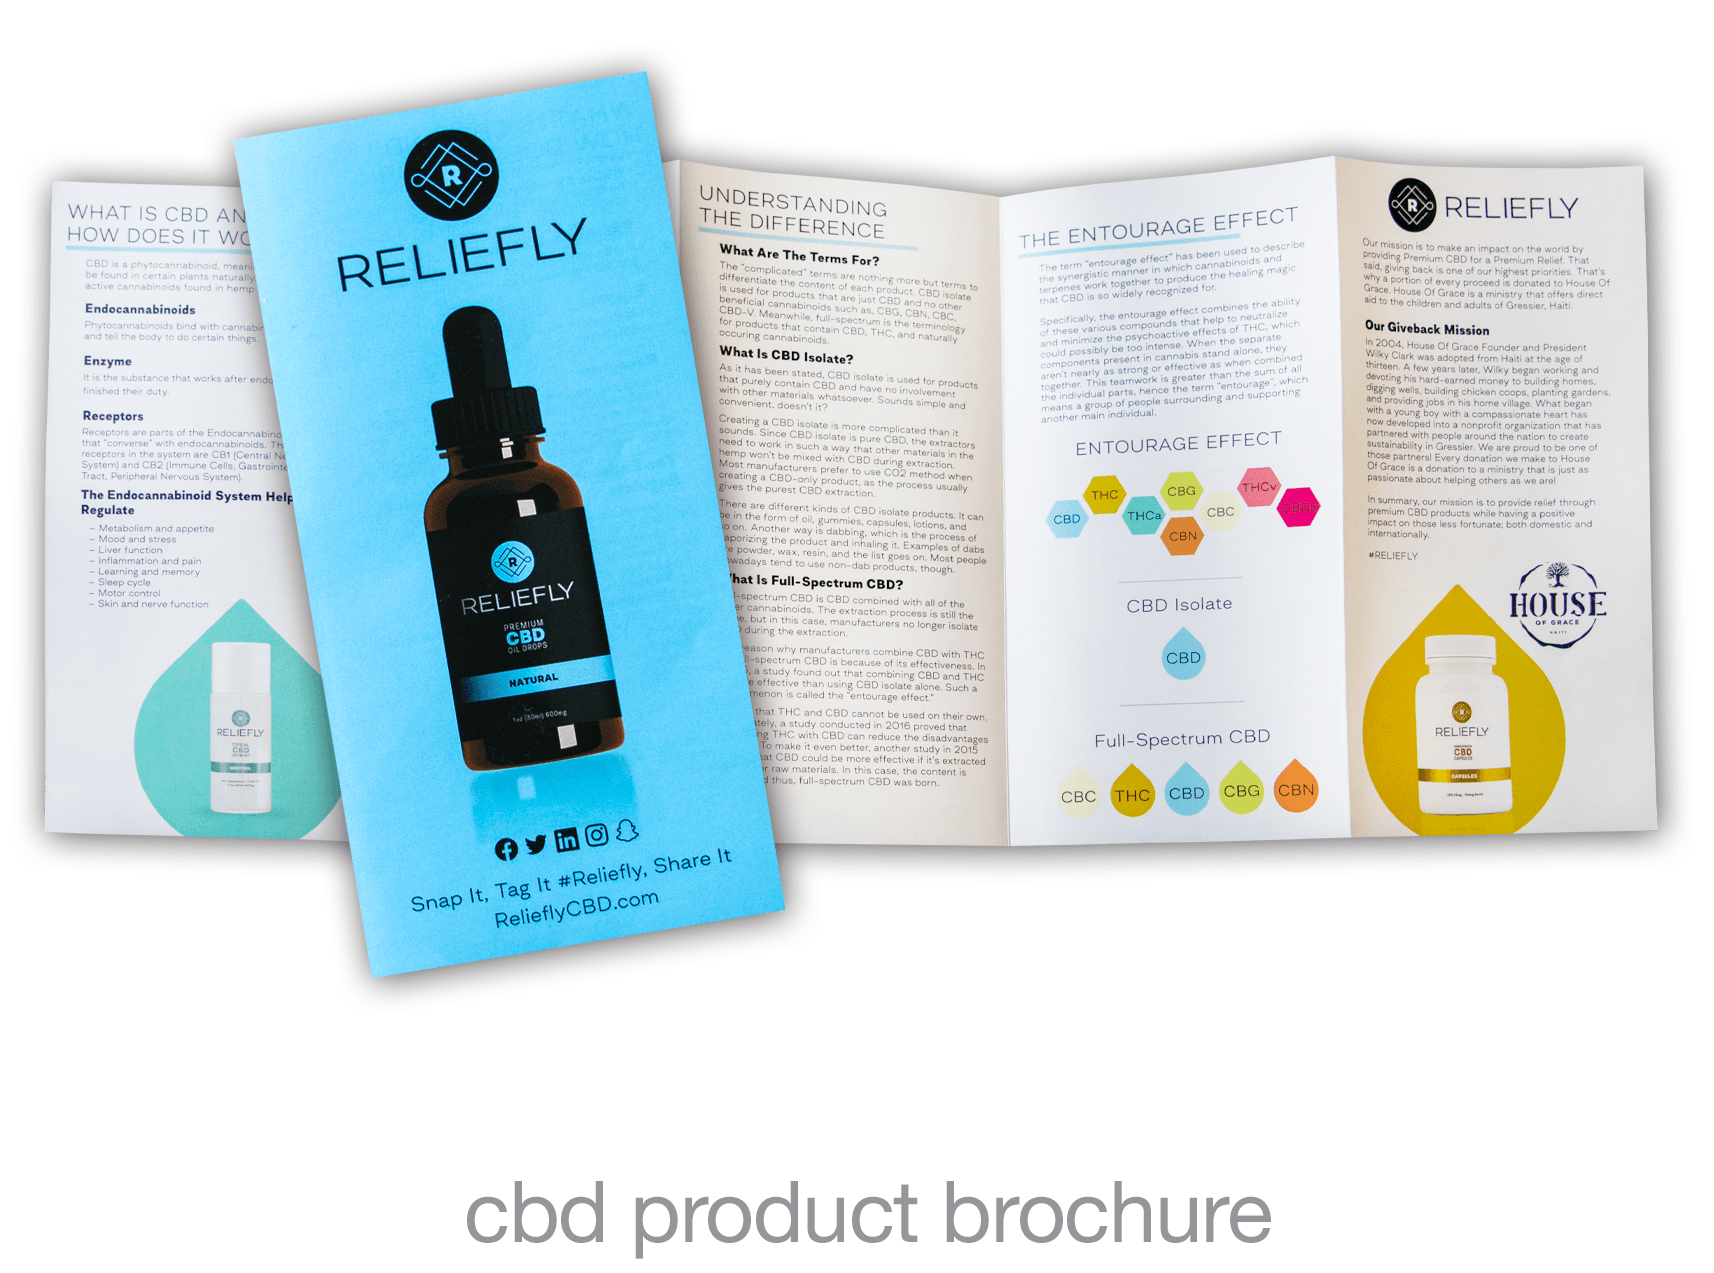 CBD Product Line Brochure for Reliefly that they could include in their CBD Sample Kits.